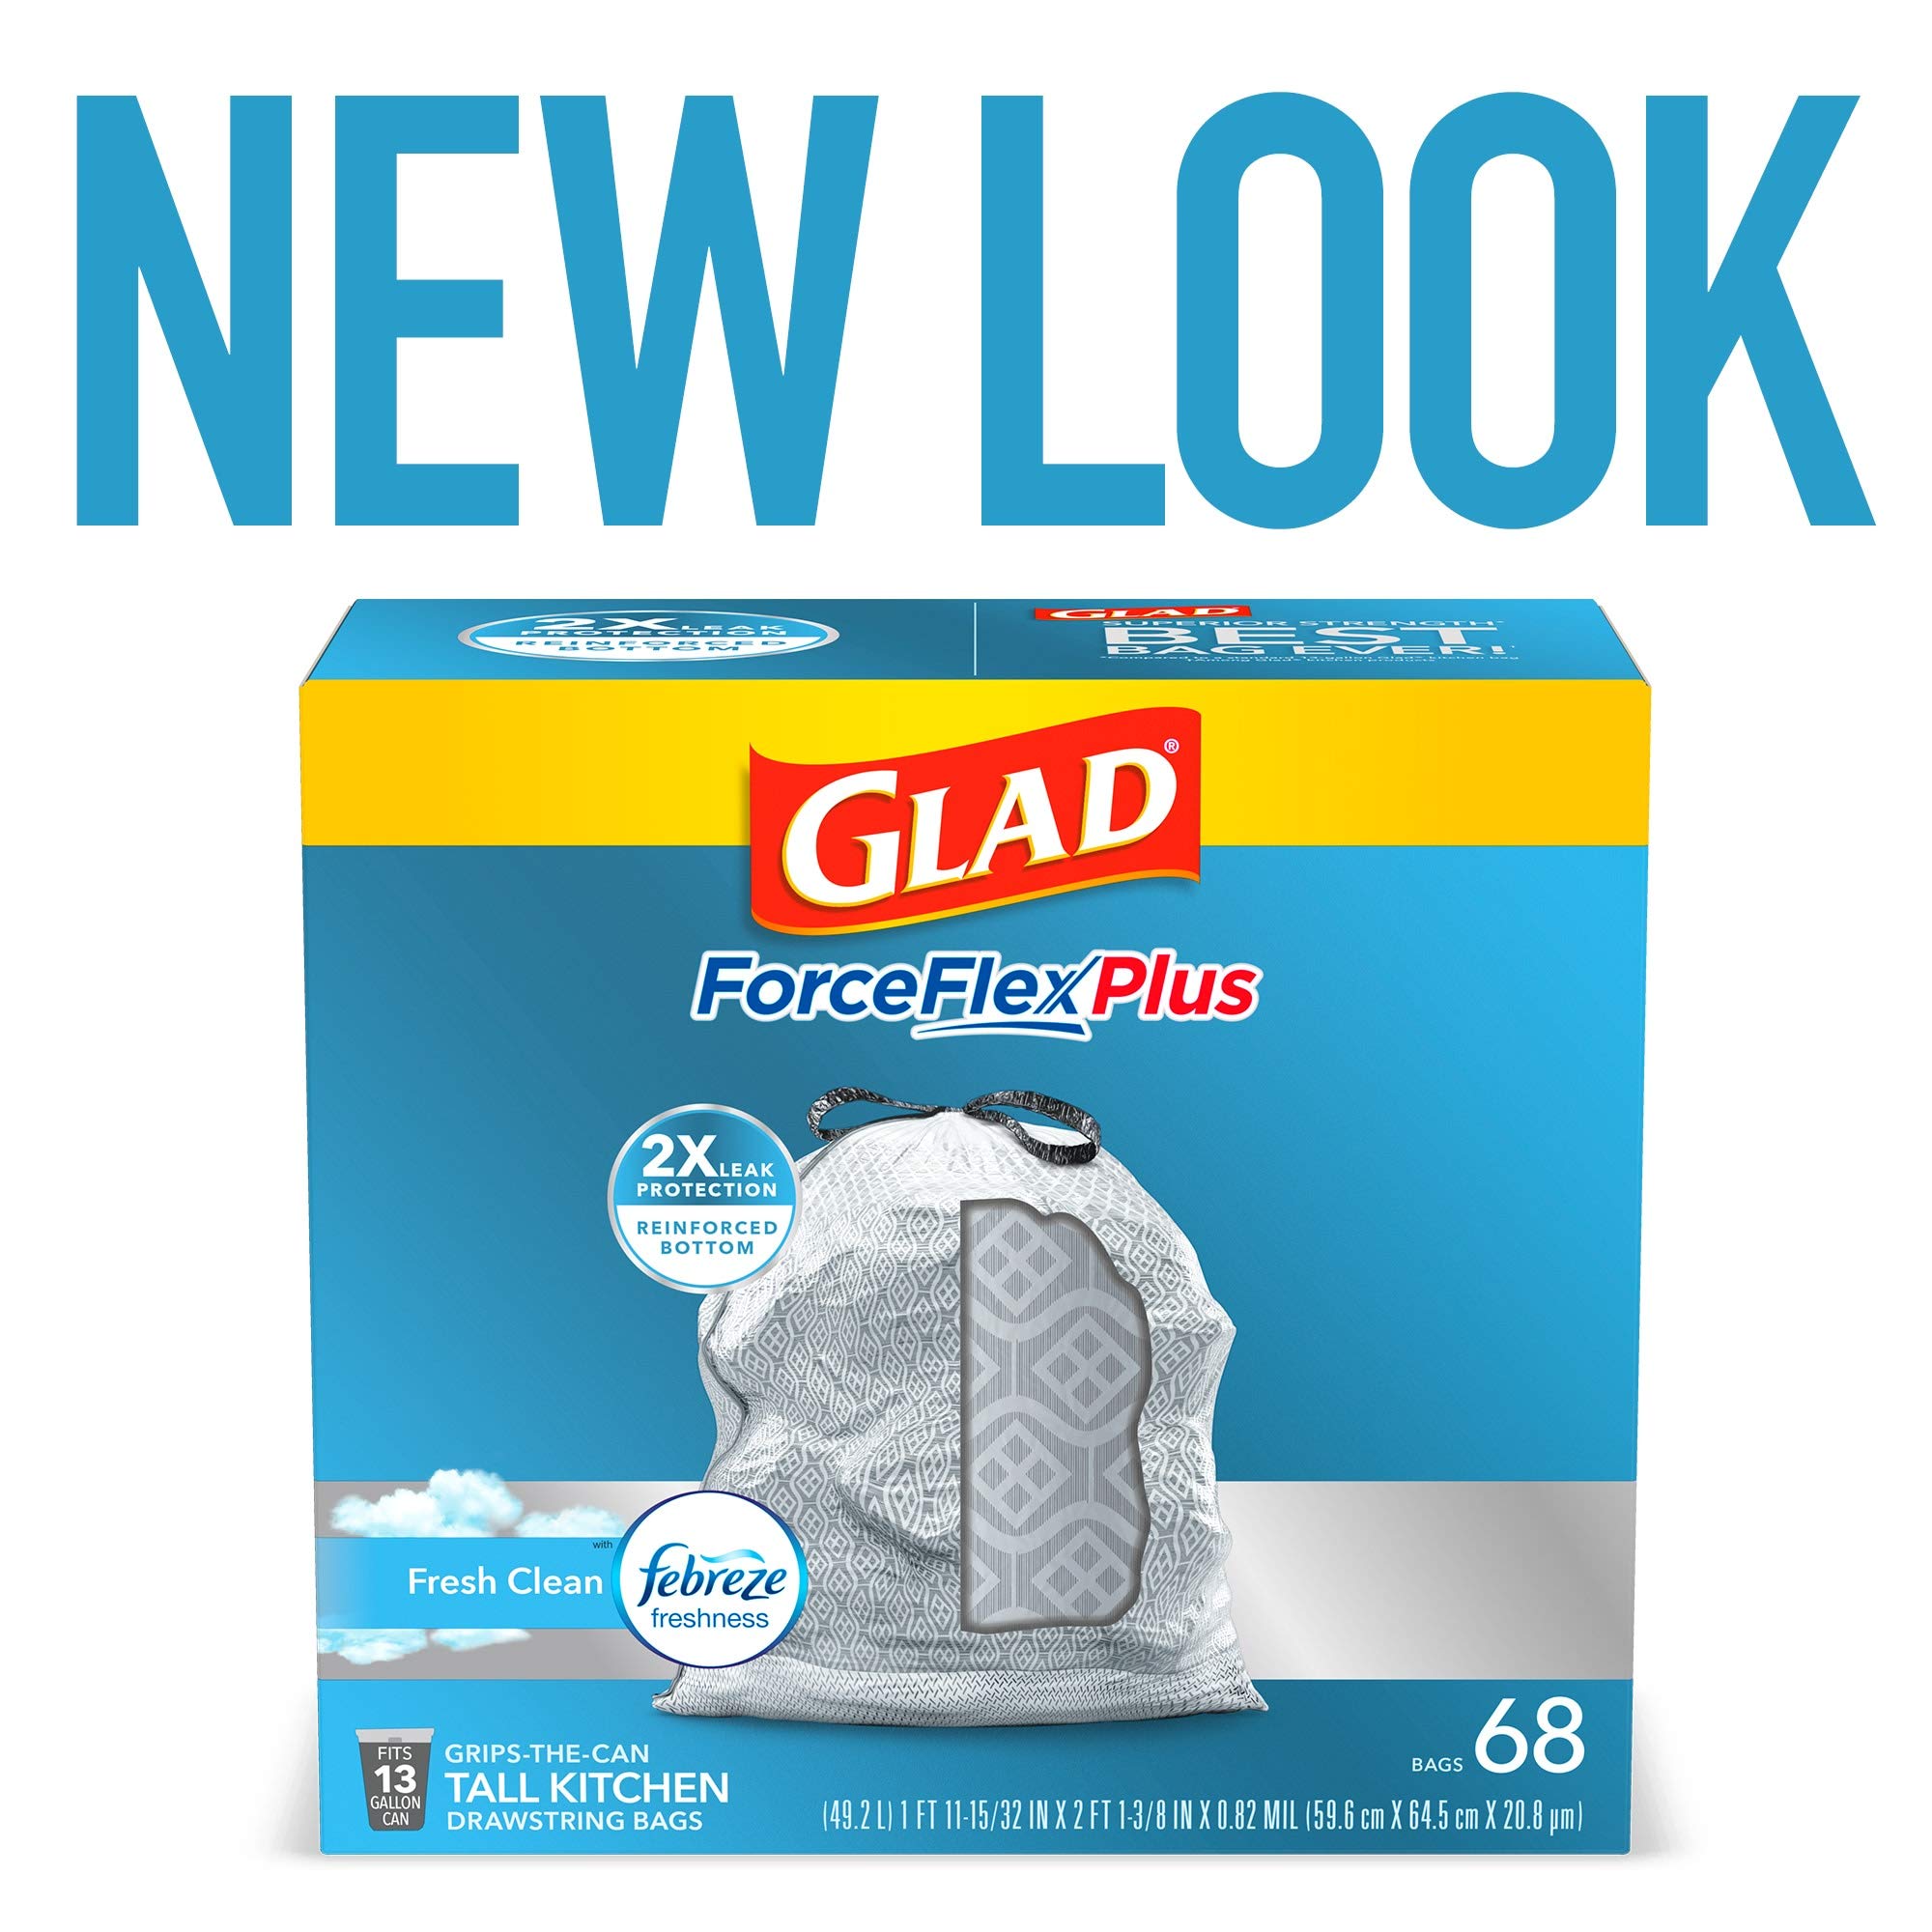 GLAD ForceFlexPlus with Febreze Tall Kitchen Drawstring Trash Bags, 13 Gallon White Trash Bag for Kitchen Trash Can, Fresh Clean Scent with Leak Protection, 68 Count (Package May Vary)